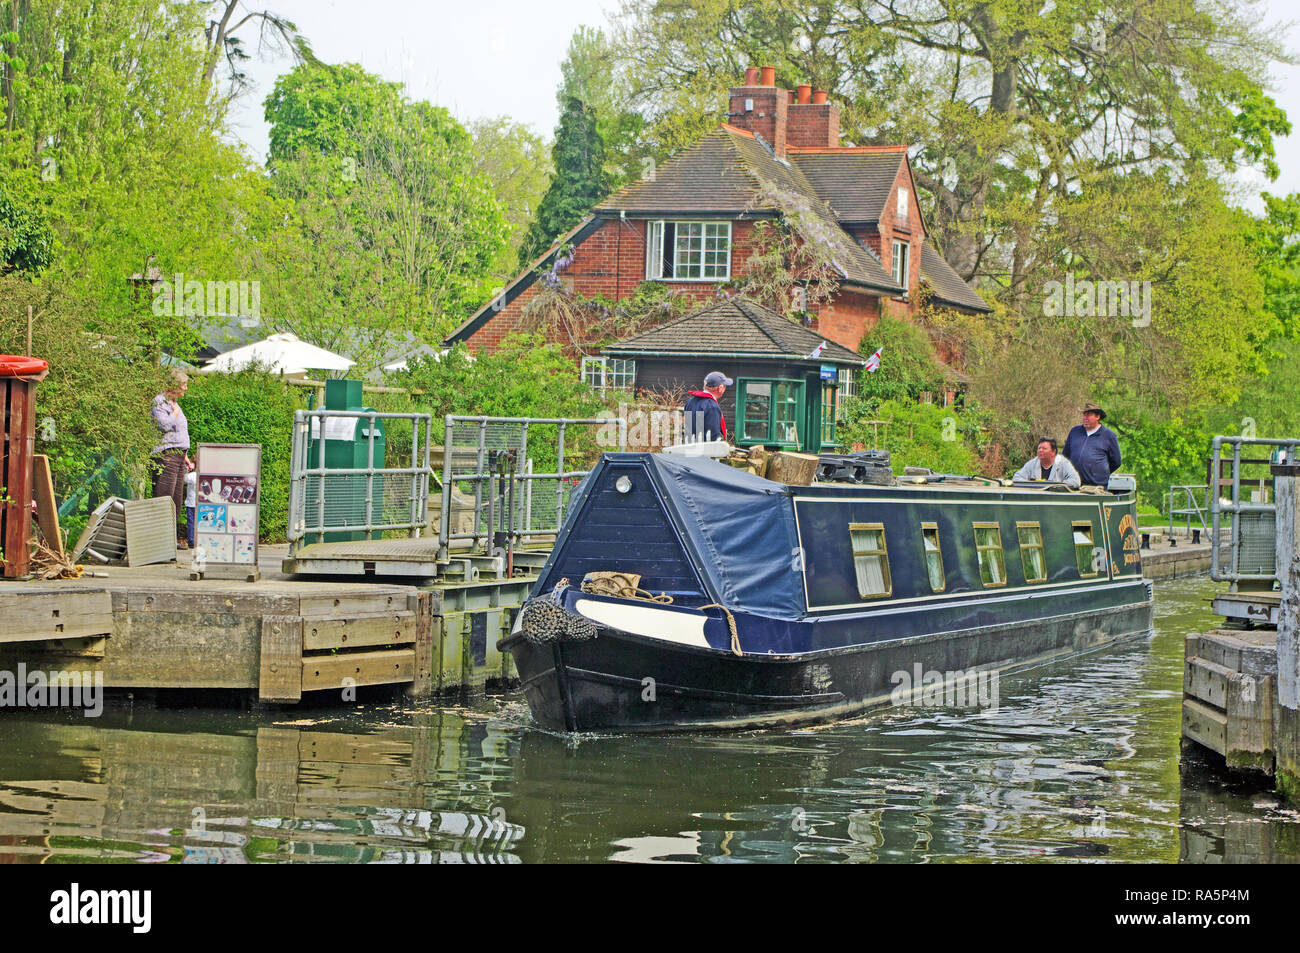 Schmalen Boot, Lock Keepers House, Sonning Lock, Themse, Berkshire Stockfoto